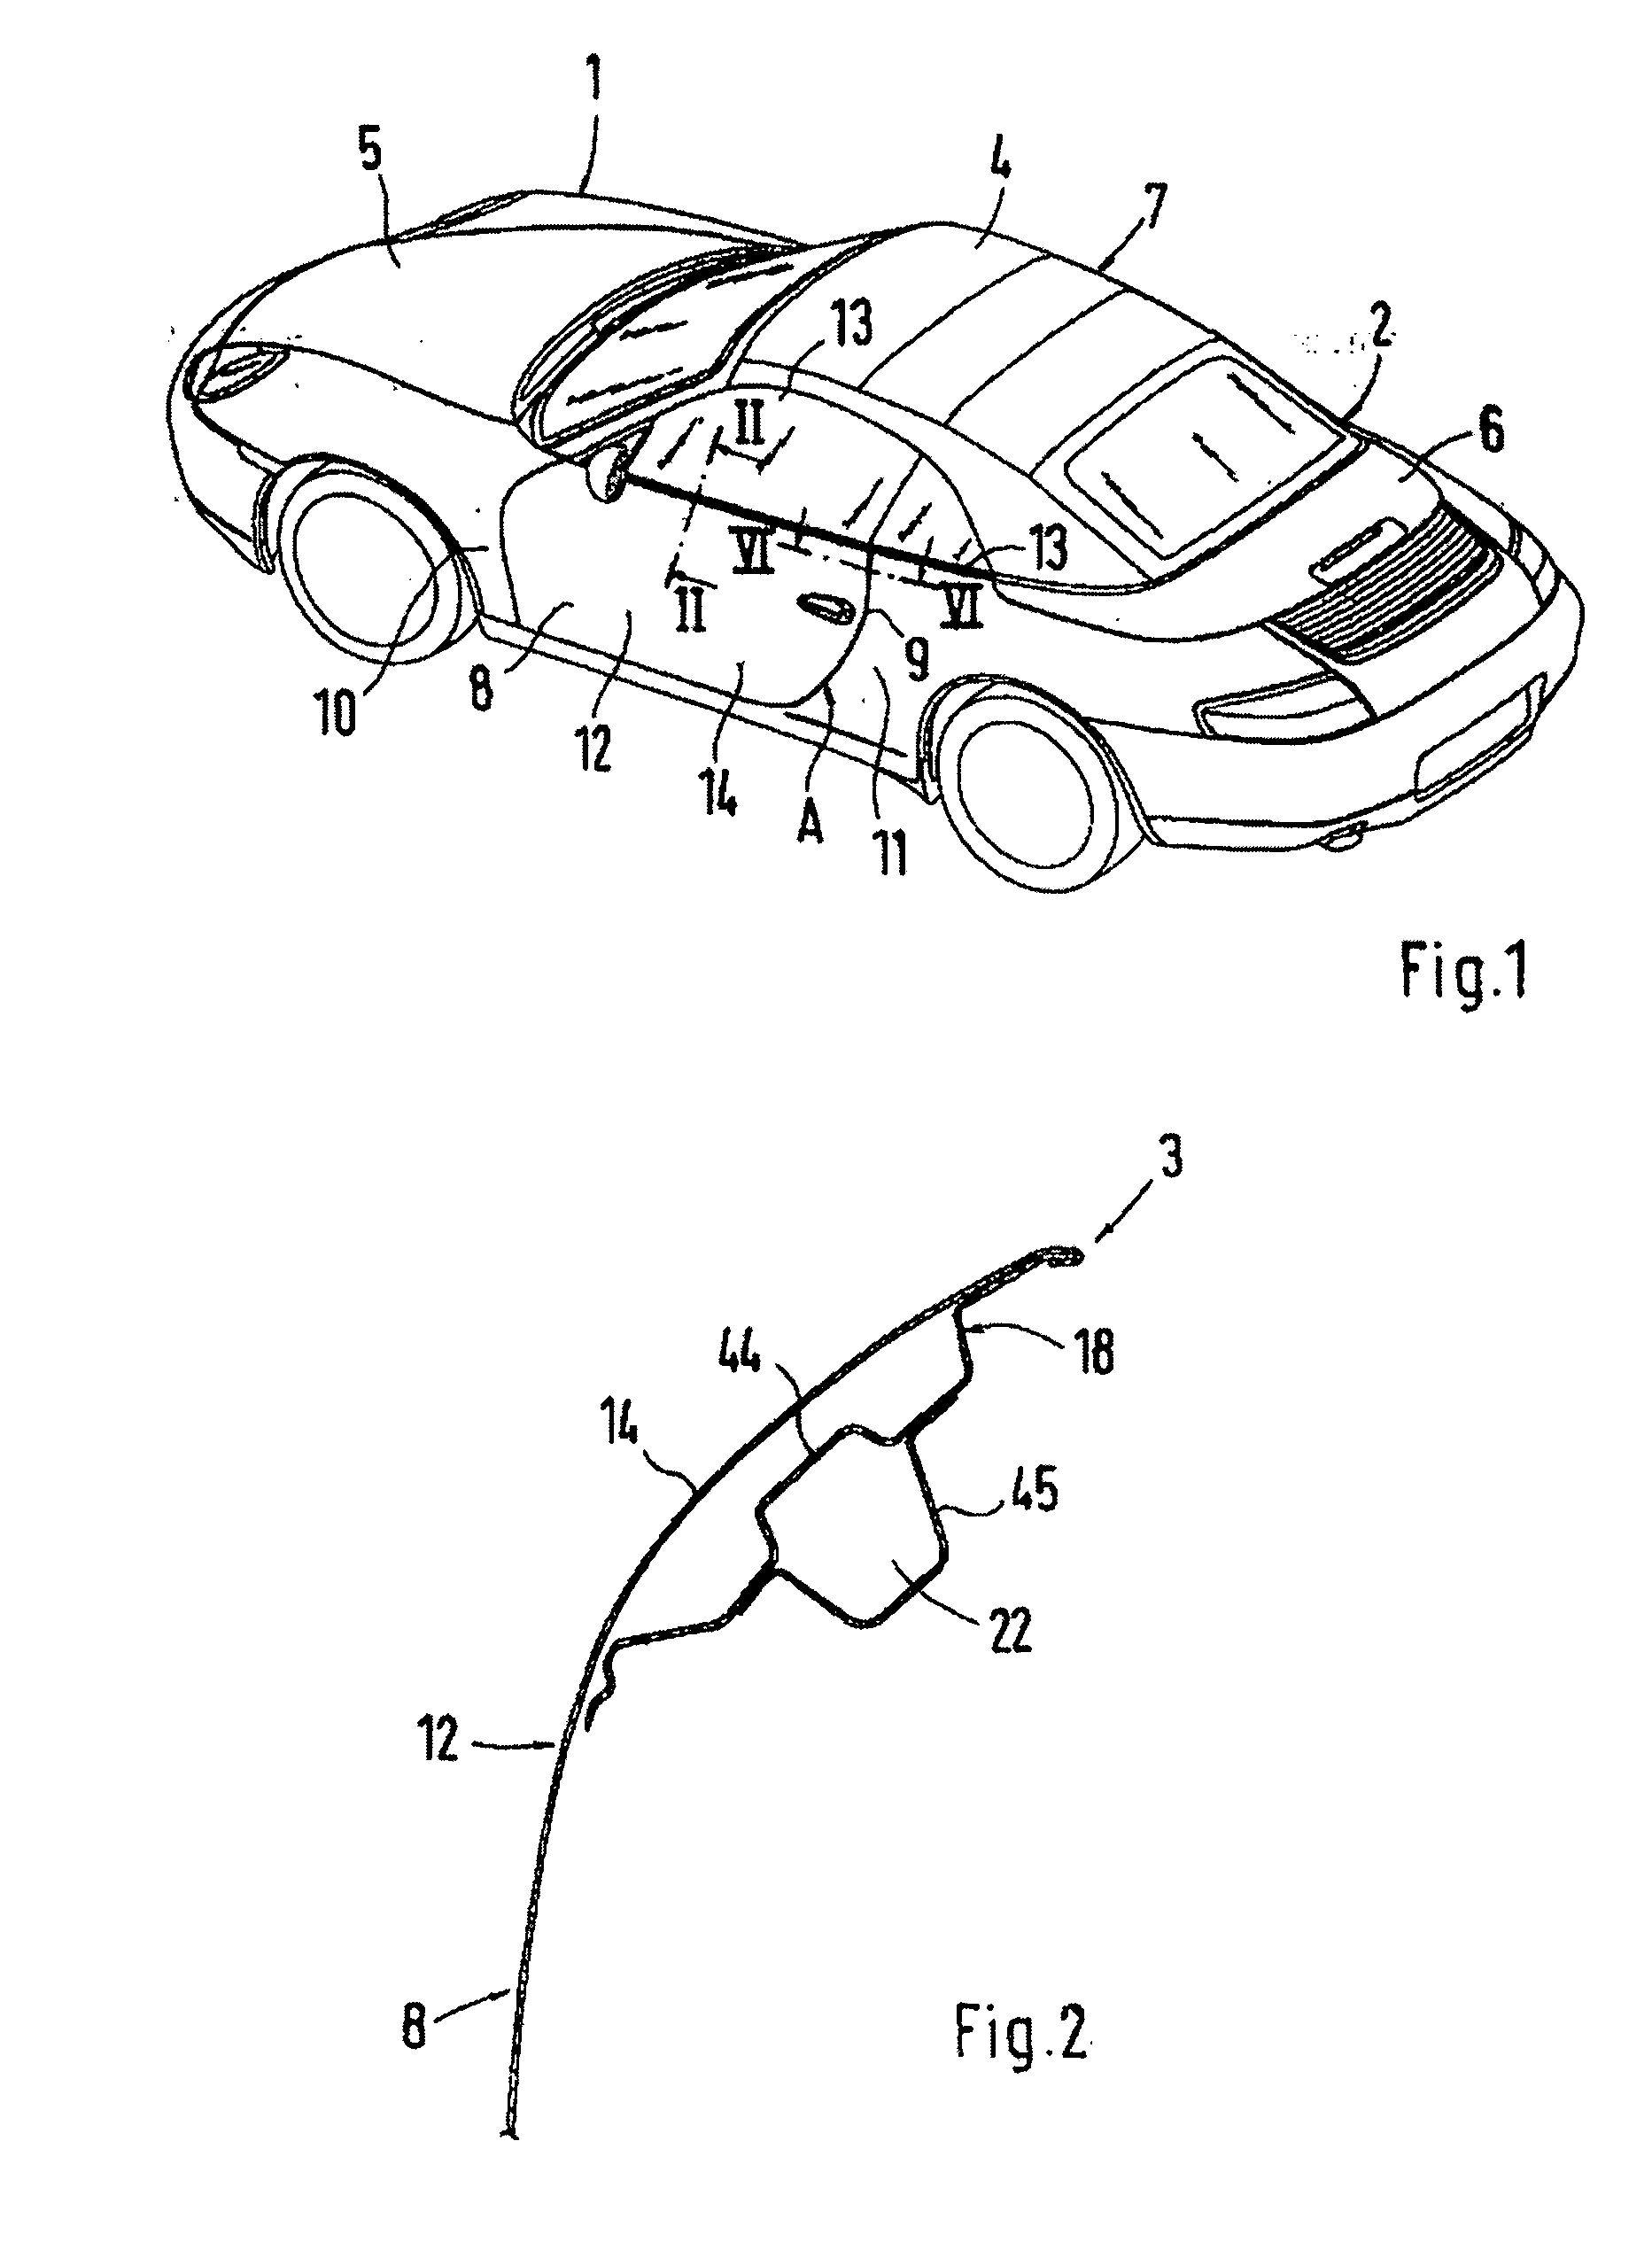 Body structure of a passenger car and especially of a convertible